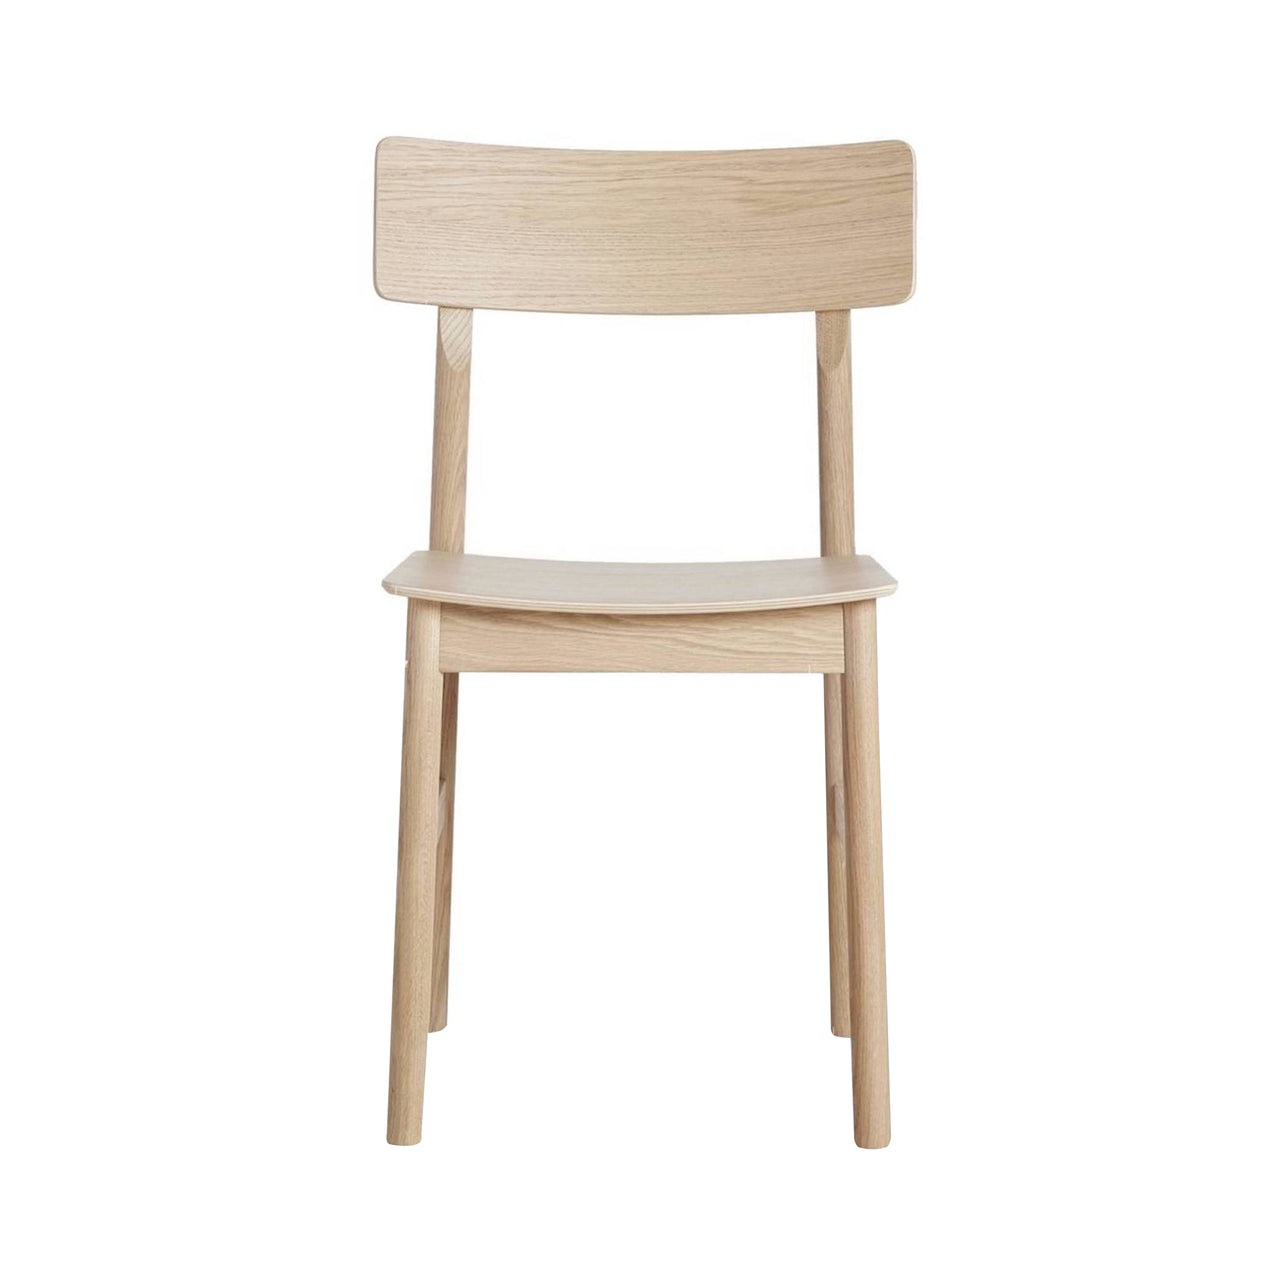 Pause Dining Chair 2.0: White Pigmented Oak + Without Seatpad